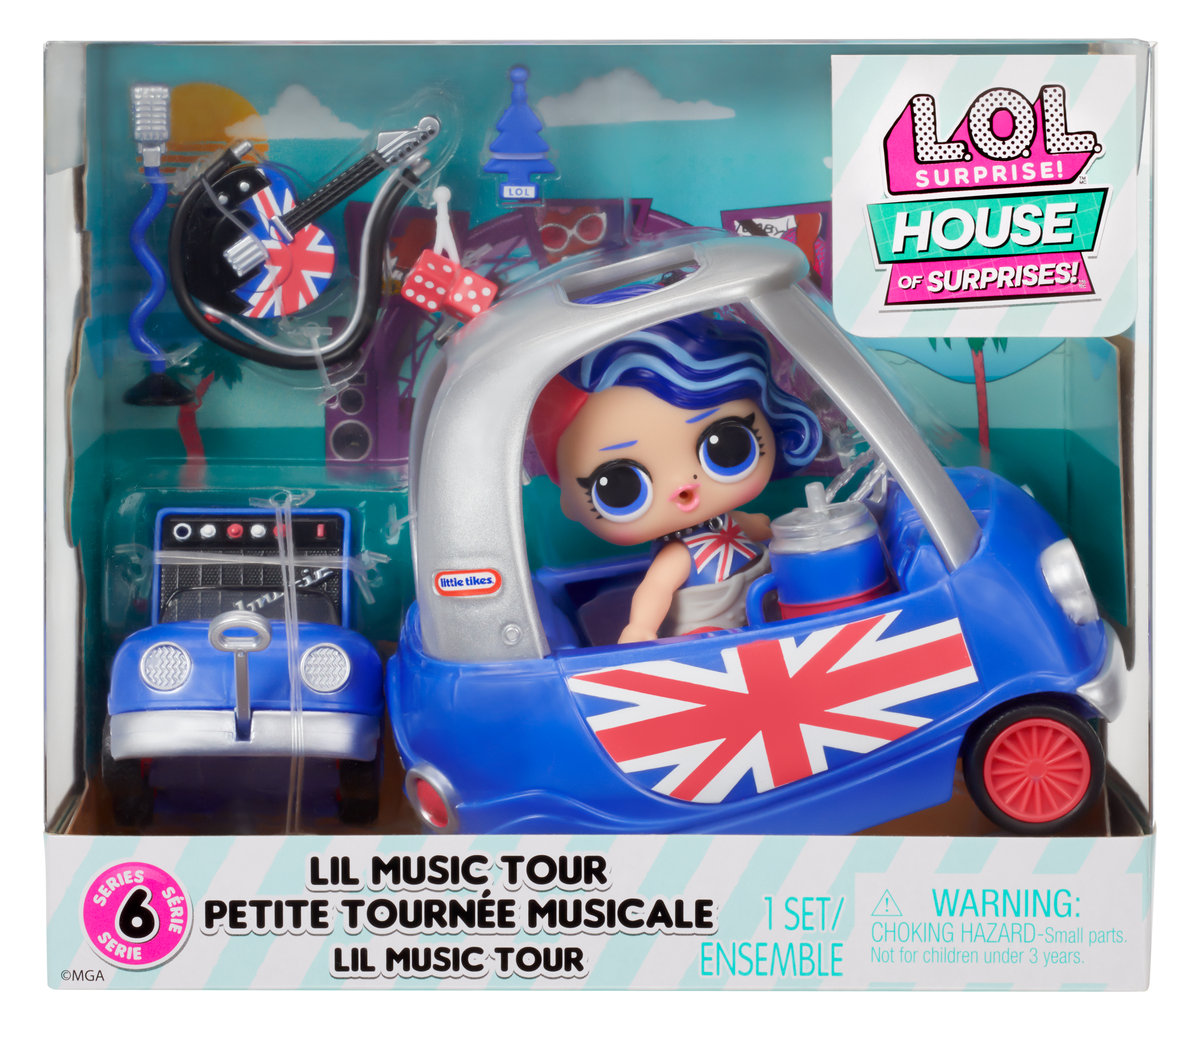 L.O.L. Surprise Furniture Playset with Doll - Cheeky Babe + Lil Music Tour